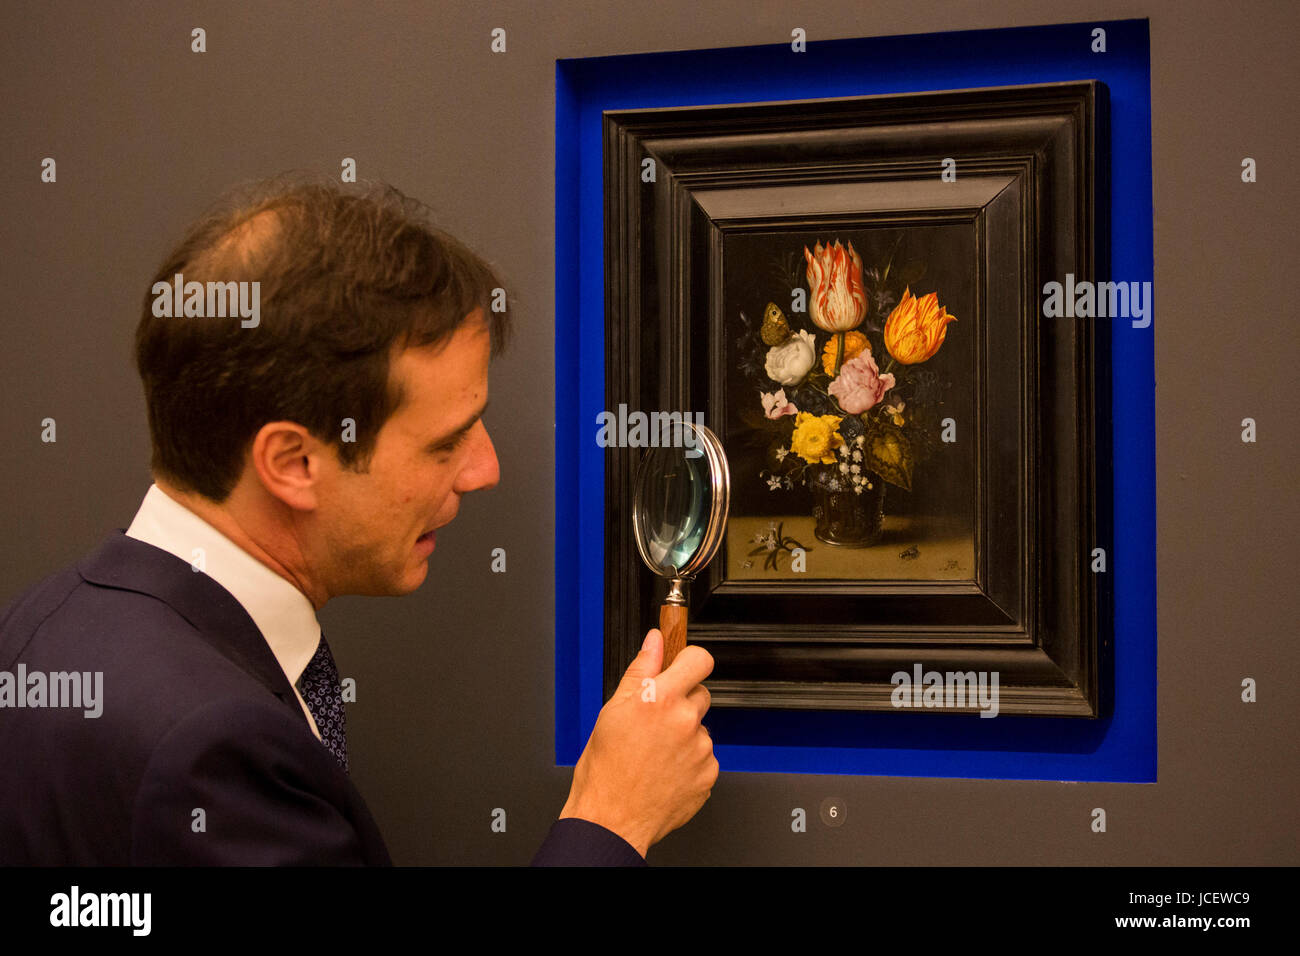 London, UK. 15 June 2017. A Sotheby's employee takes a close look at Still Life with Flowers by Ambrosius Bosschaert the Elder, circa 1608-10, estimate GBP 2 to 3 million. Auction house Sotheby's presents Actual Size, a curated evening sale on 21 June 2017. Stock Photo